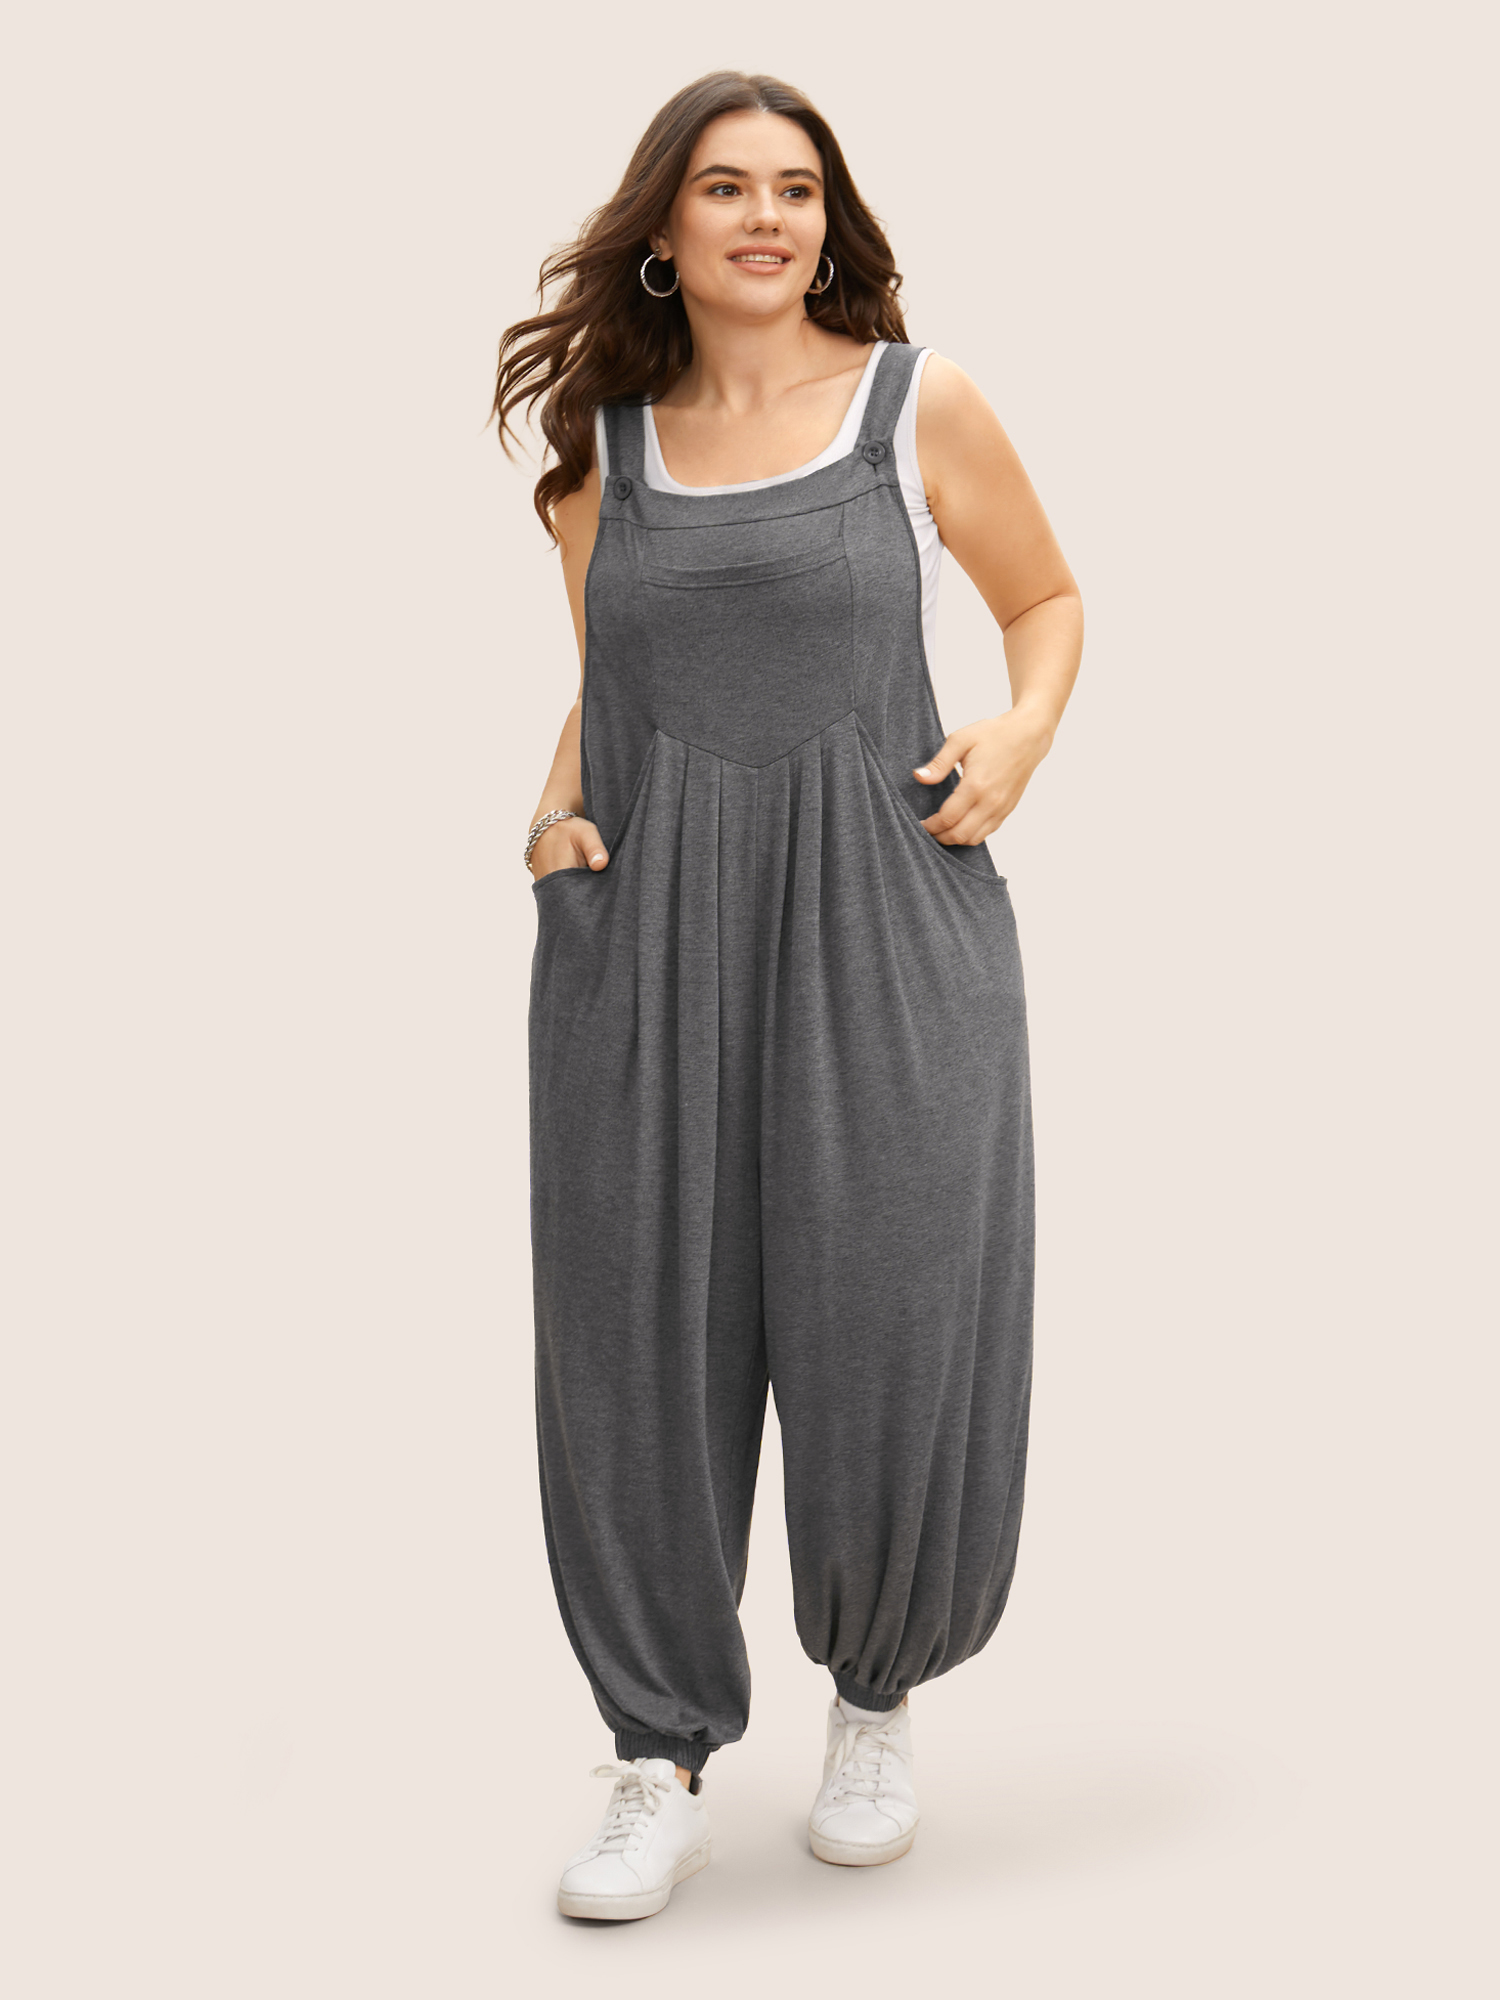 

Plus Size DimGray Square Neck Patched Pocket Pleated Carrot Jumpsuit Women Casual Sleeveless Square Neck Everyday Loose Jumpsuits BloomChic